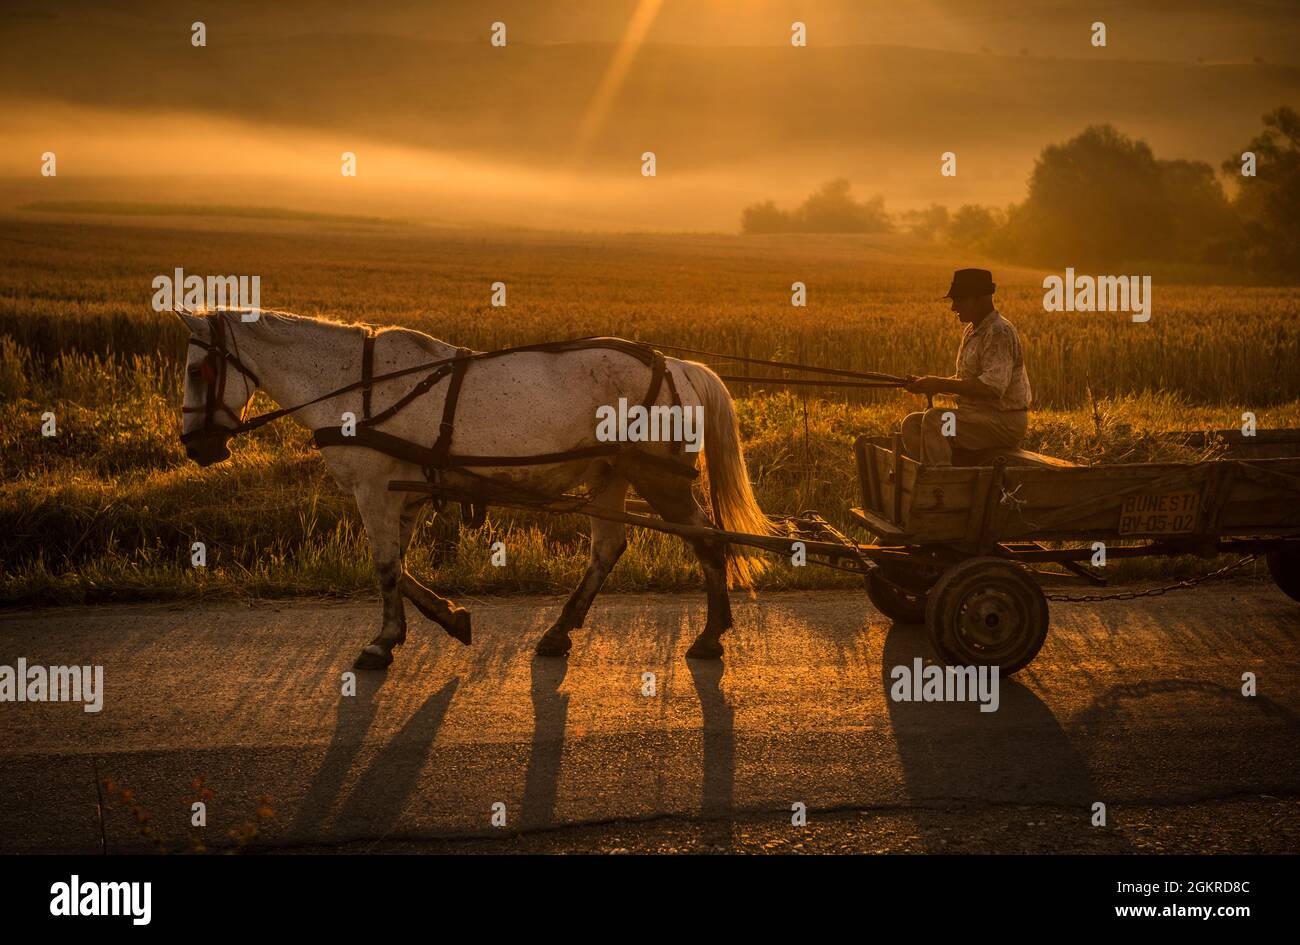 An elderly man on his way to collect hay in his horse-drawn wagon at dawn, Romania, Europe Stock Photo